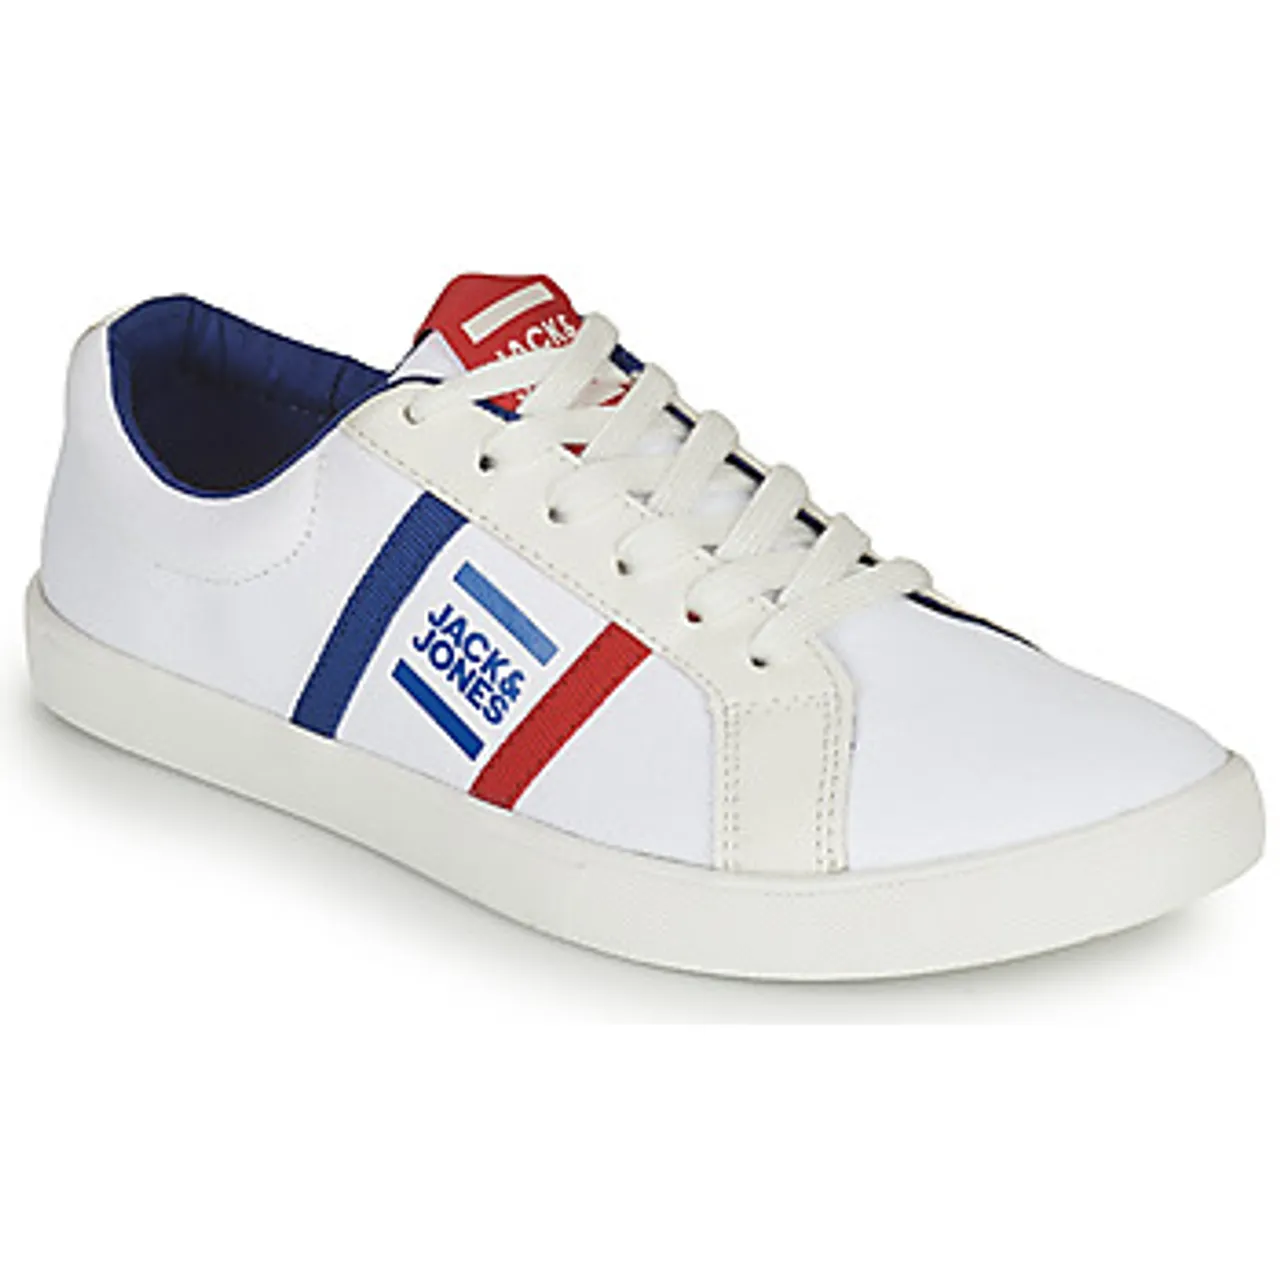 Jack & Jones  WHILEY  boys's Children's Shoes (Trainers) in White